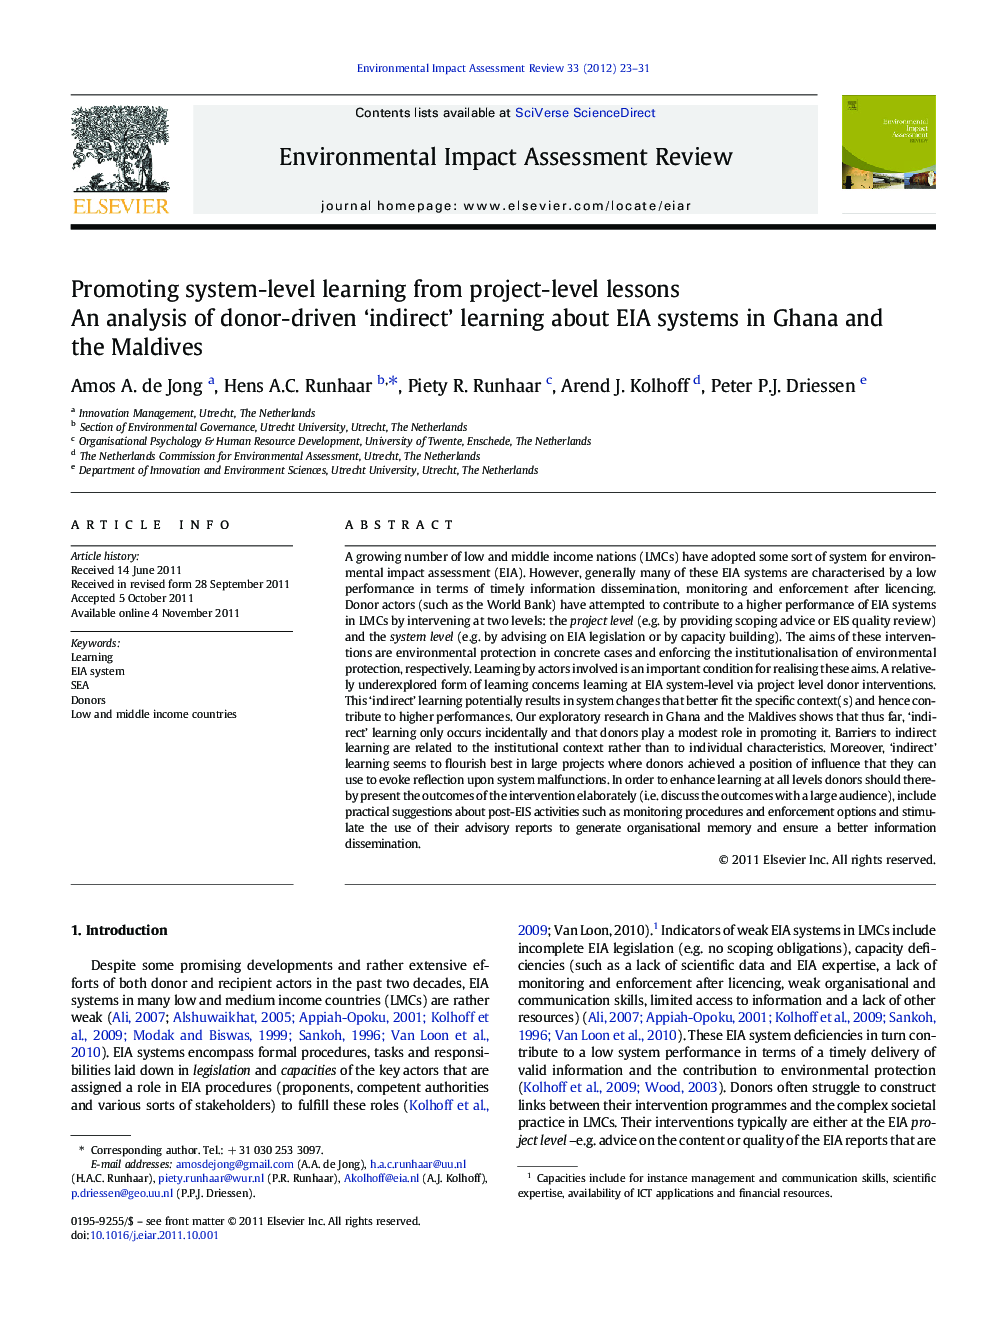 Promoting system-level learning from project-level lessons: An analysis of donor-driven ‘indirect’ learning about EIA systems in Ghana and the Maldives